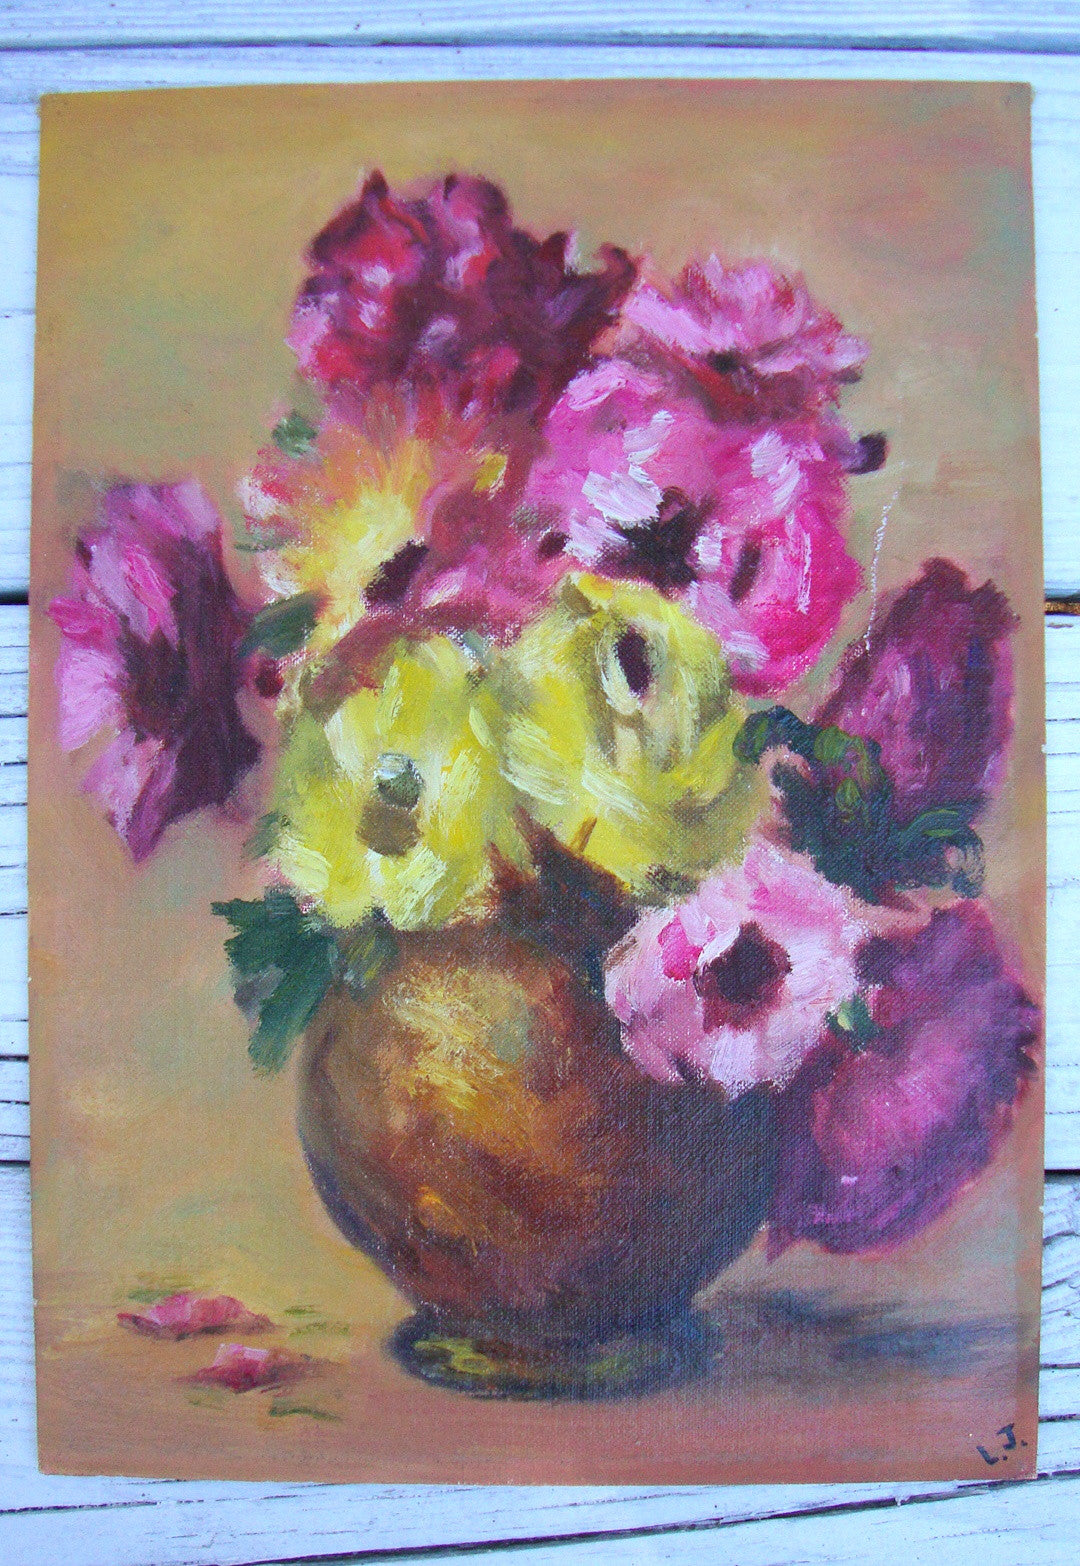 [SOLD] ARTIST LOUISE JOHNSON COLLECTION ORIGINAL PAINTING FLORAL STILL LIFE /PIECE [B]